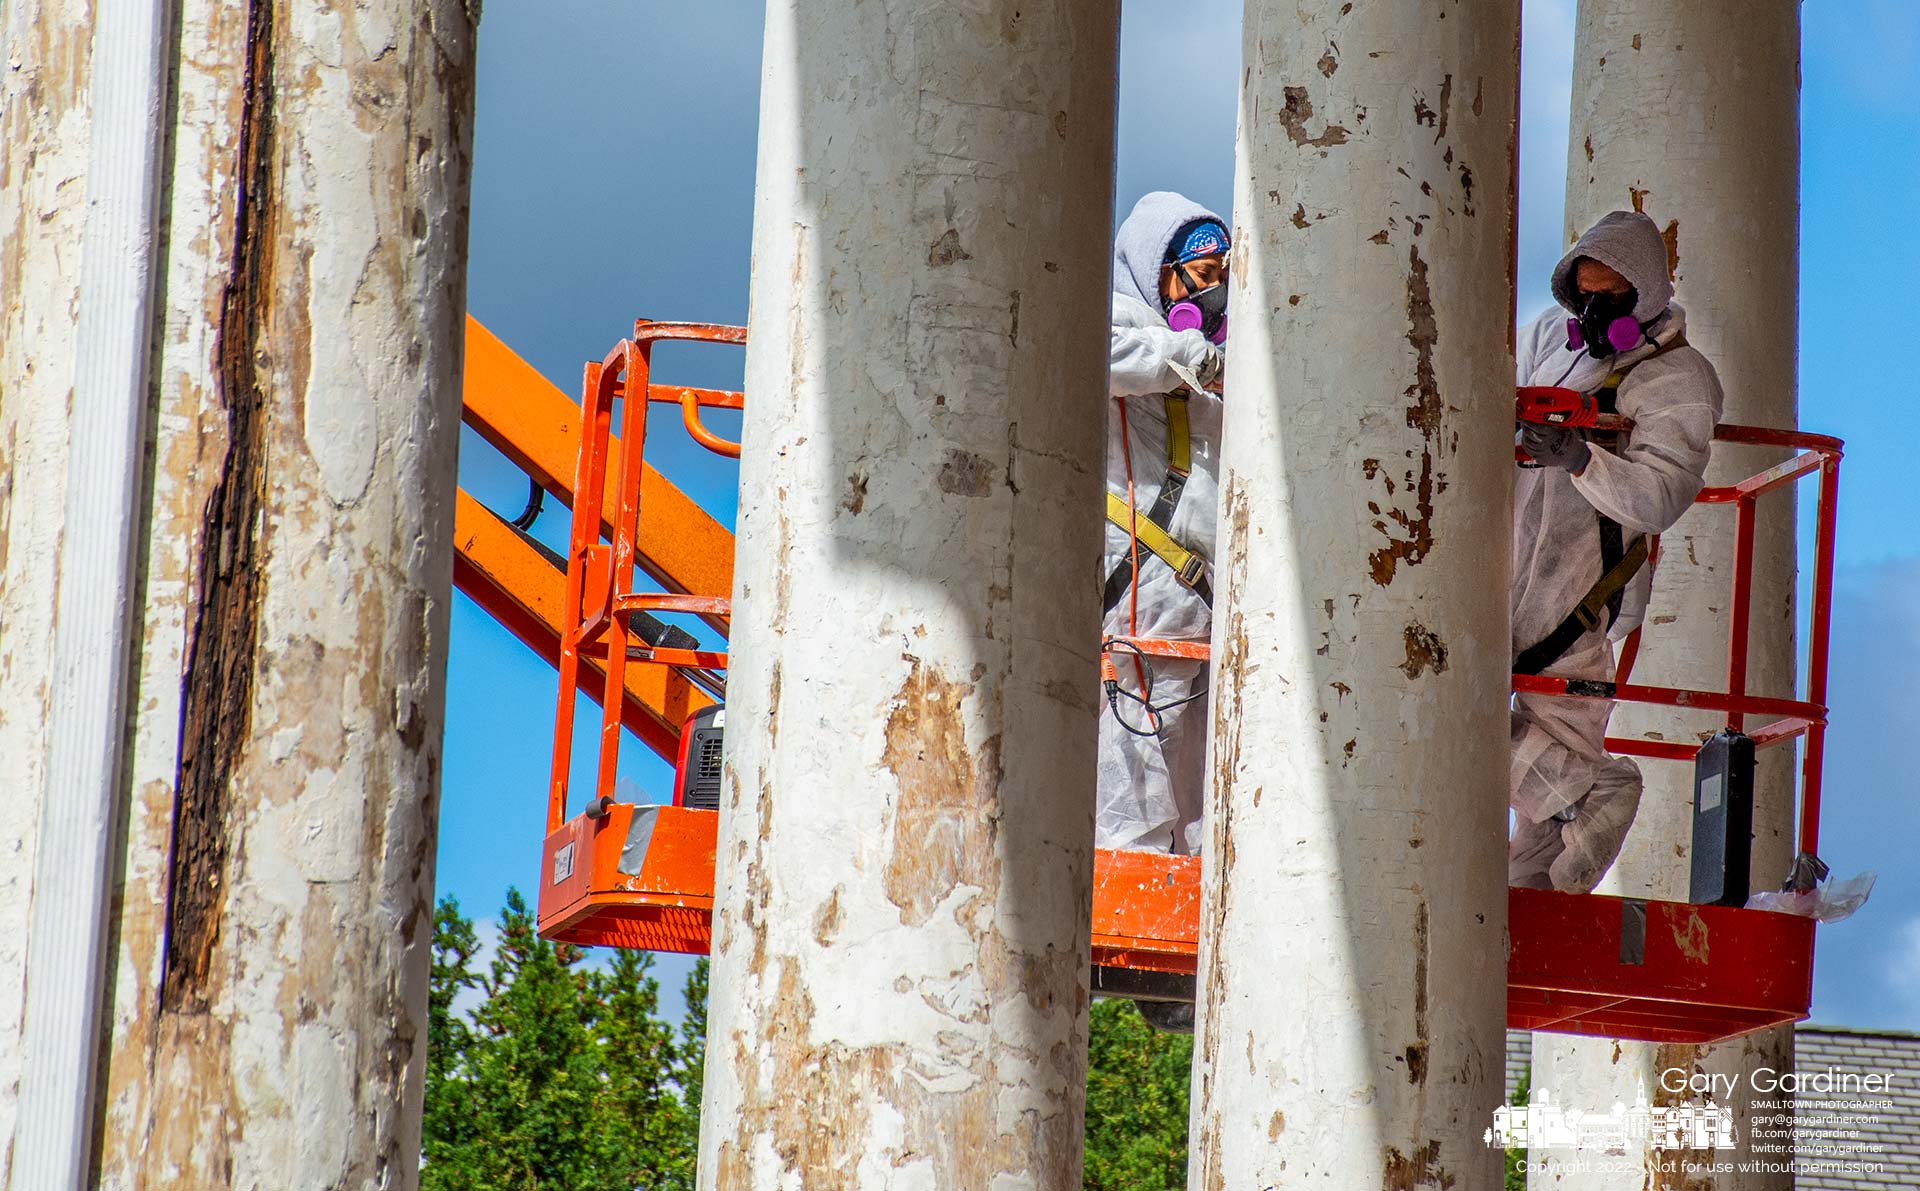 An environmental remediation crew removes paint from the columns at the entrance to the Masonic Temple on South State Street as repairs begin on the structure. My Final Photo for September 28, 2022.